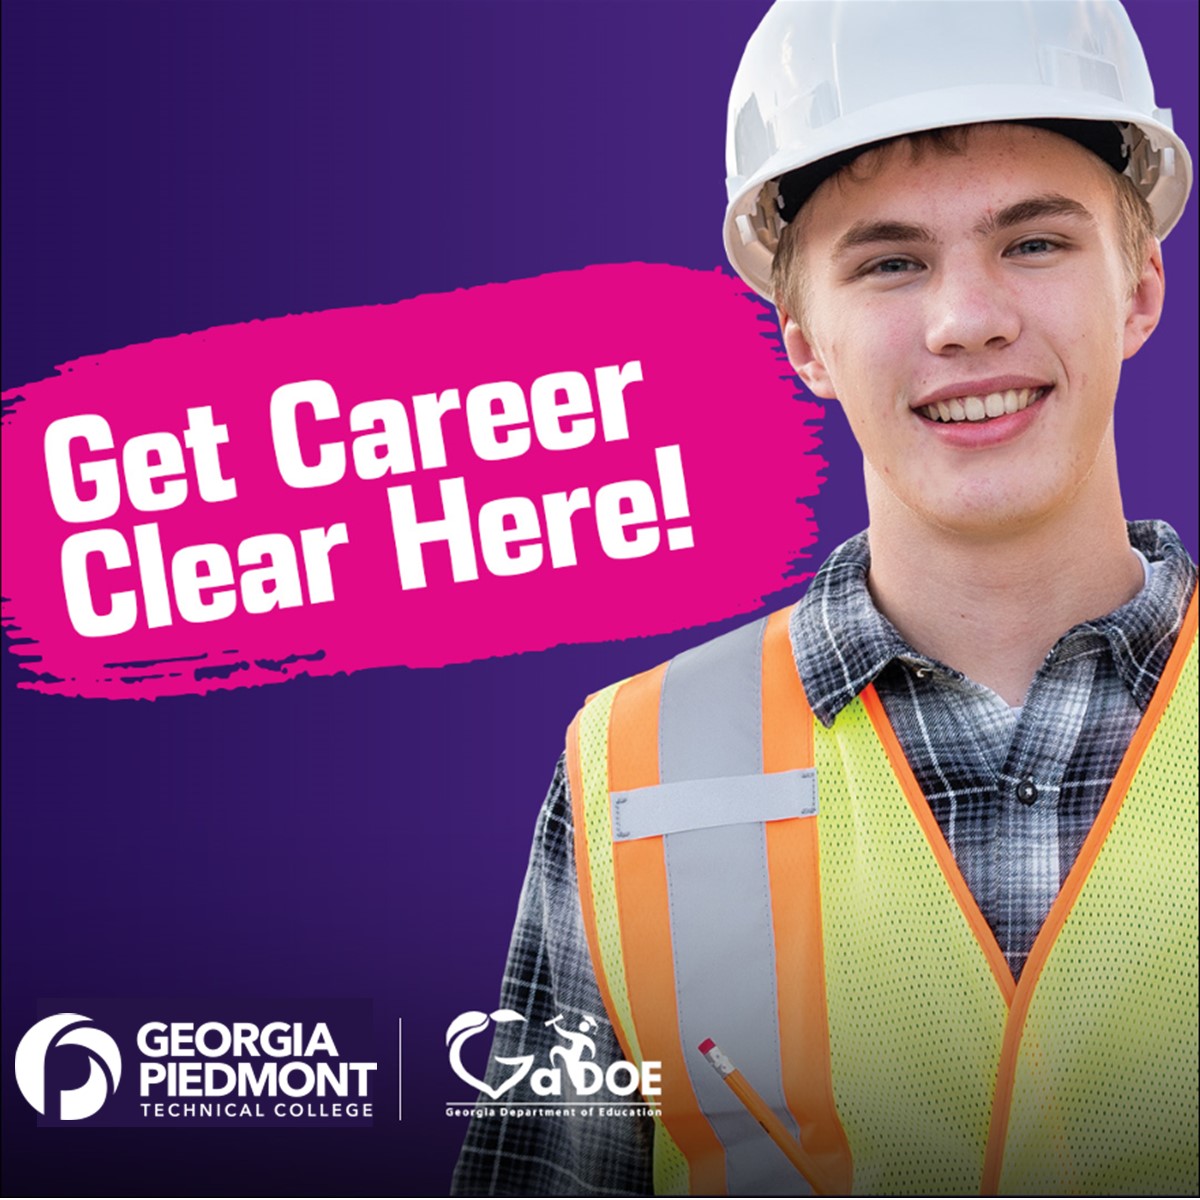 Get Career Clear with CTAE (Career, Technical & Agricultural Education)! Explore career paths while in high school 🎓And GA Piedmont is here to help. Visit CareerClearGeorgia.com for details. #GPTCConnects #CareerClear